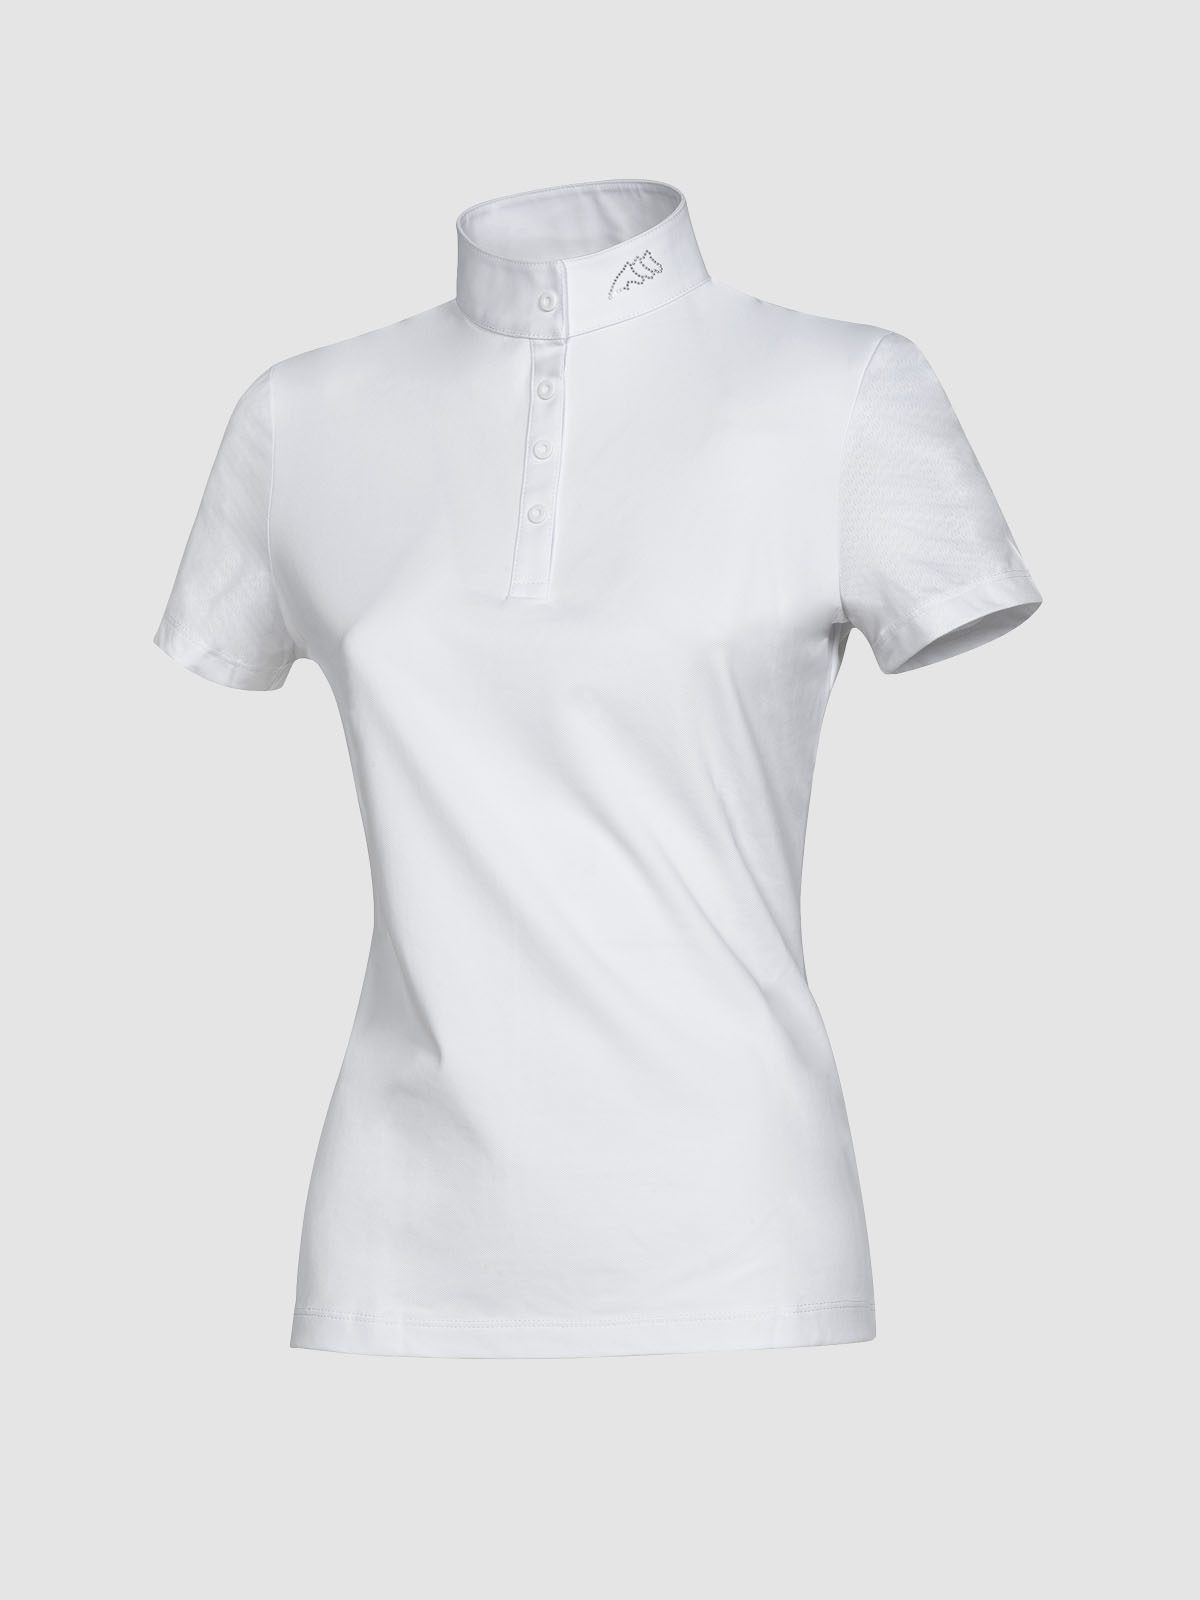 ESDIE WOMEN'S SHORT SLEEVE COMPETITION POLO SHIRT 3